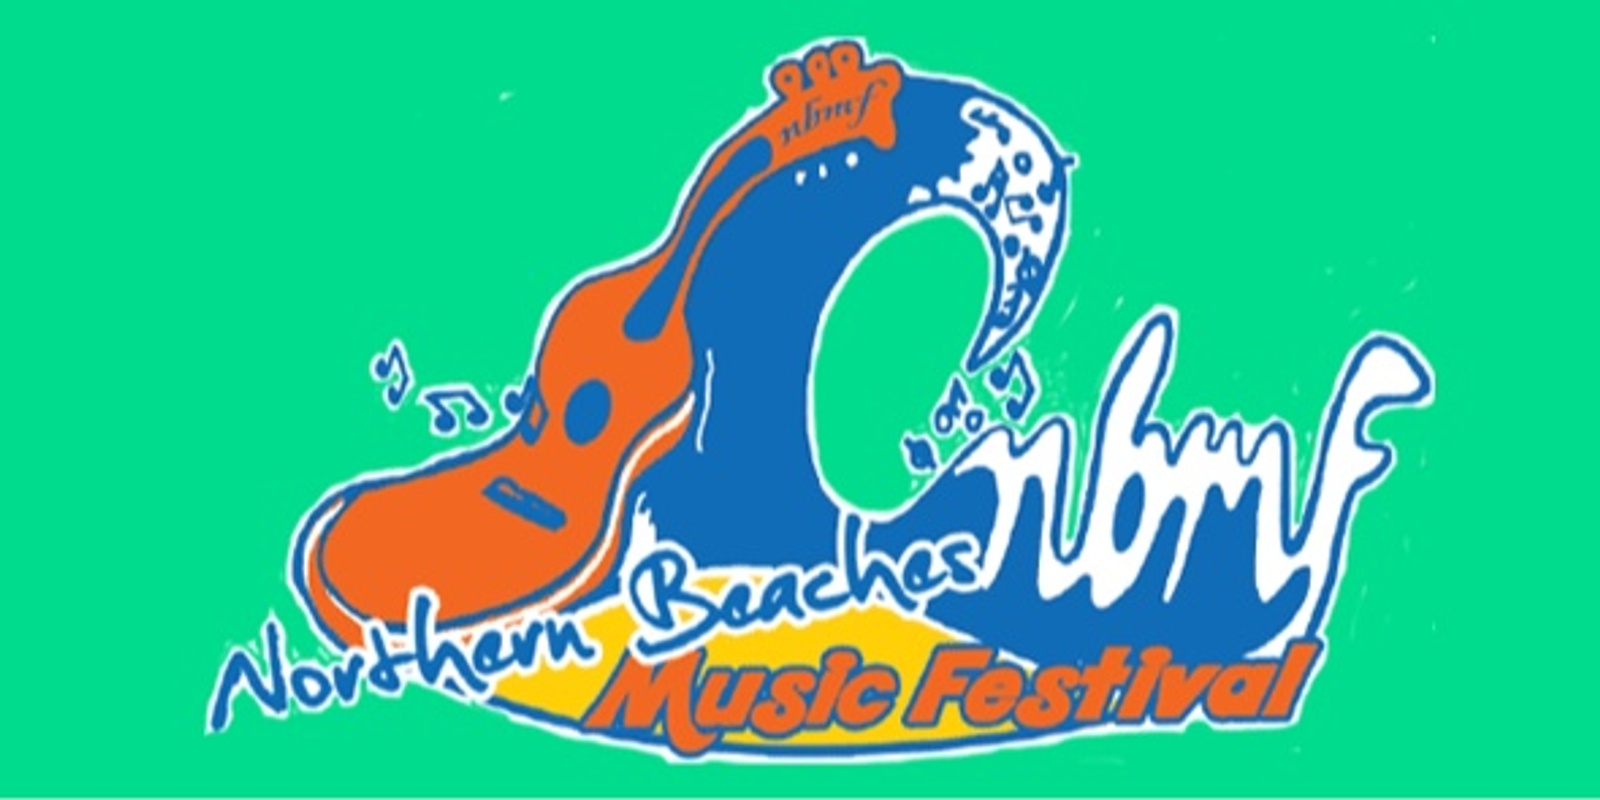 Banner image for Northern Beaches Music Festival